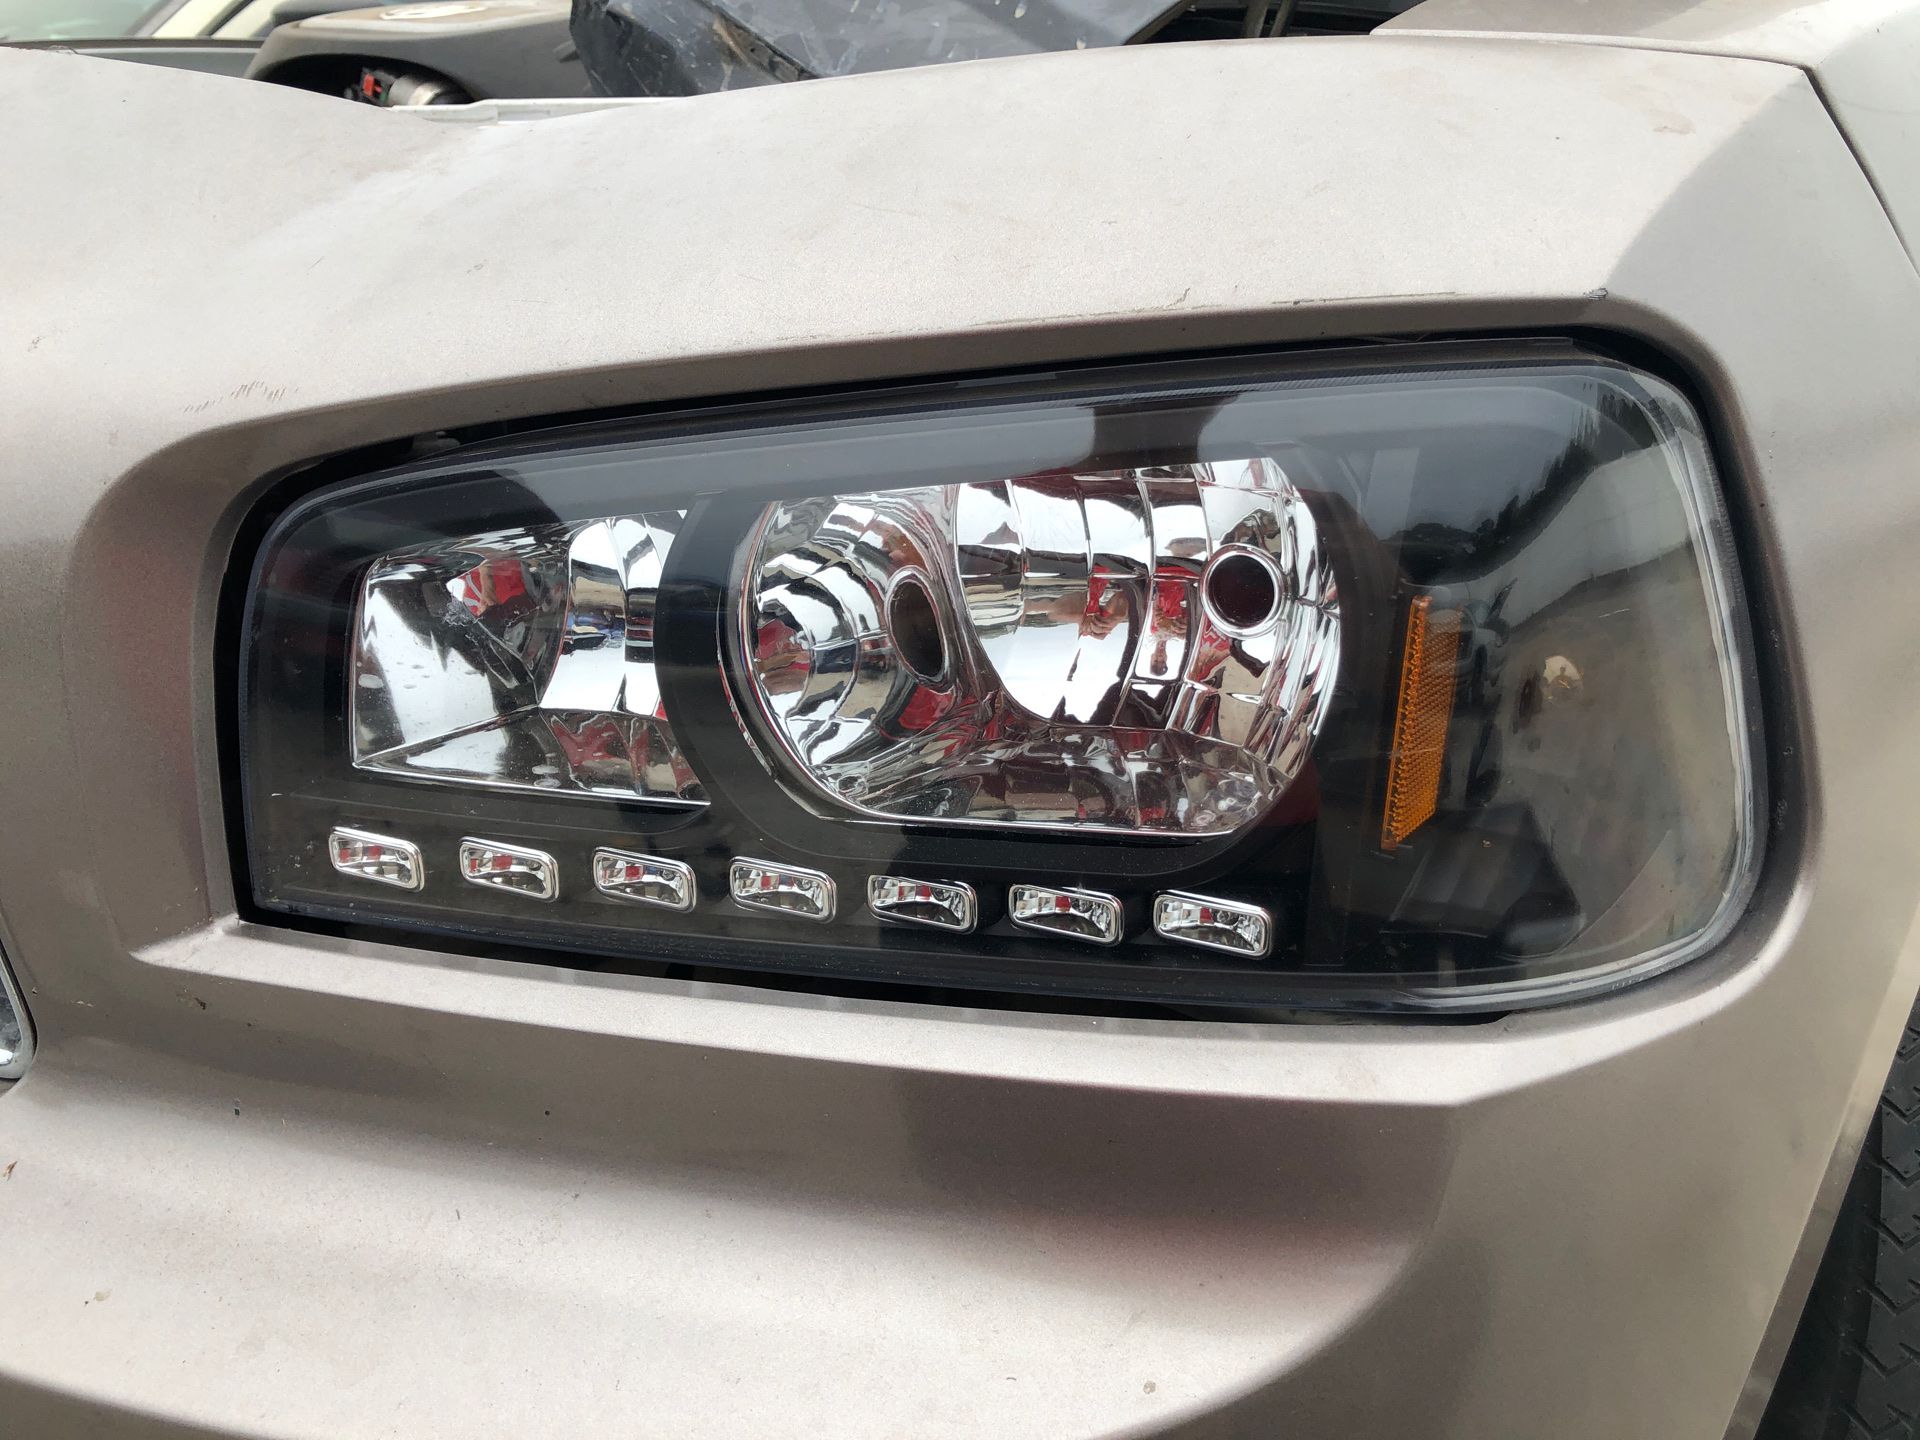 2007 Dodge Charger headlights